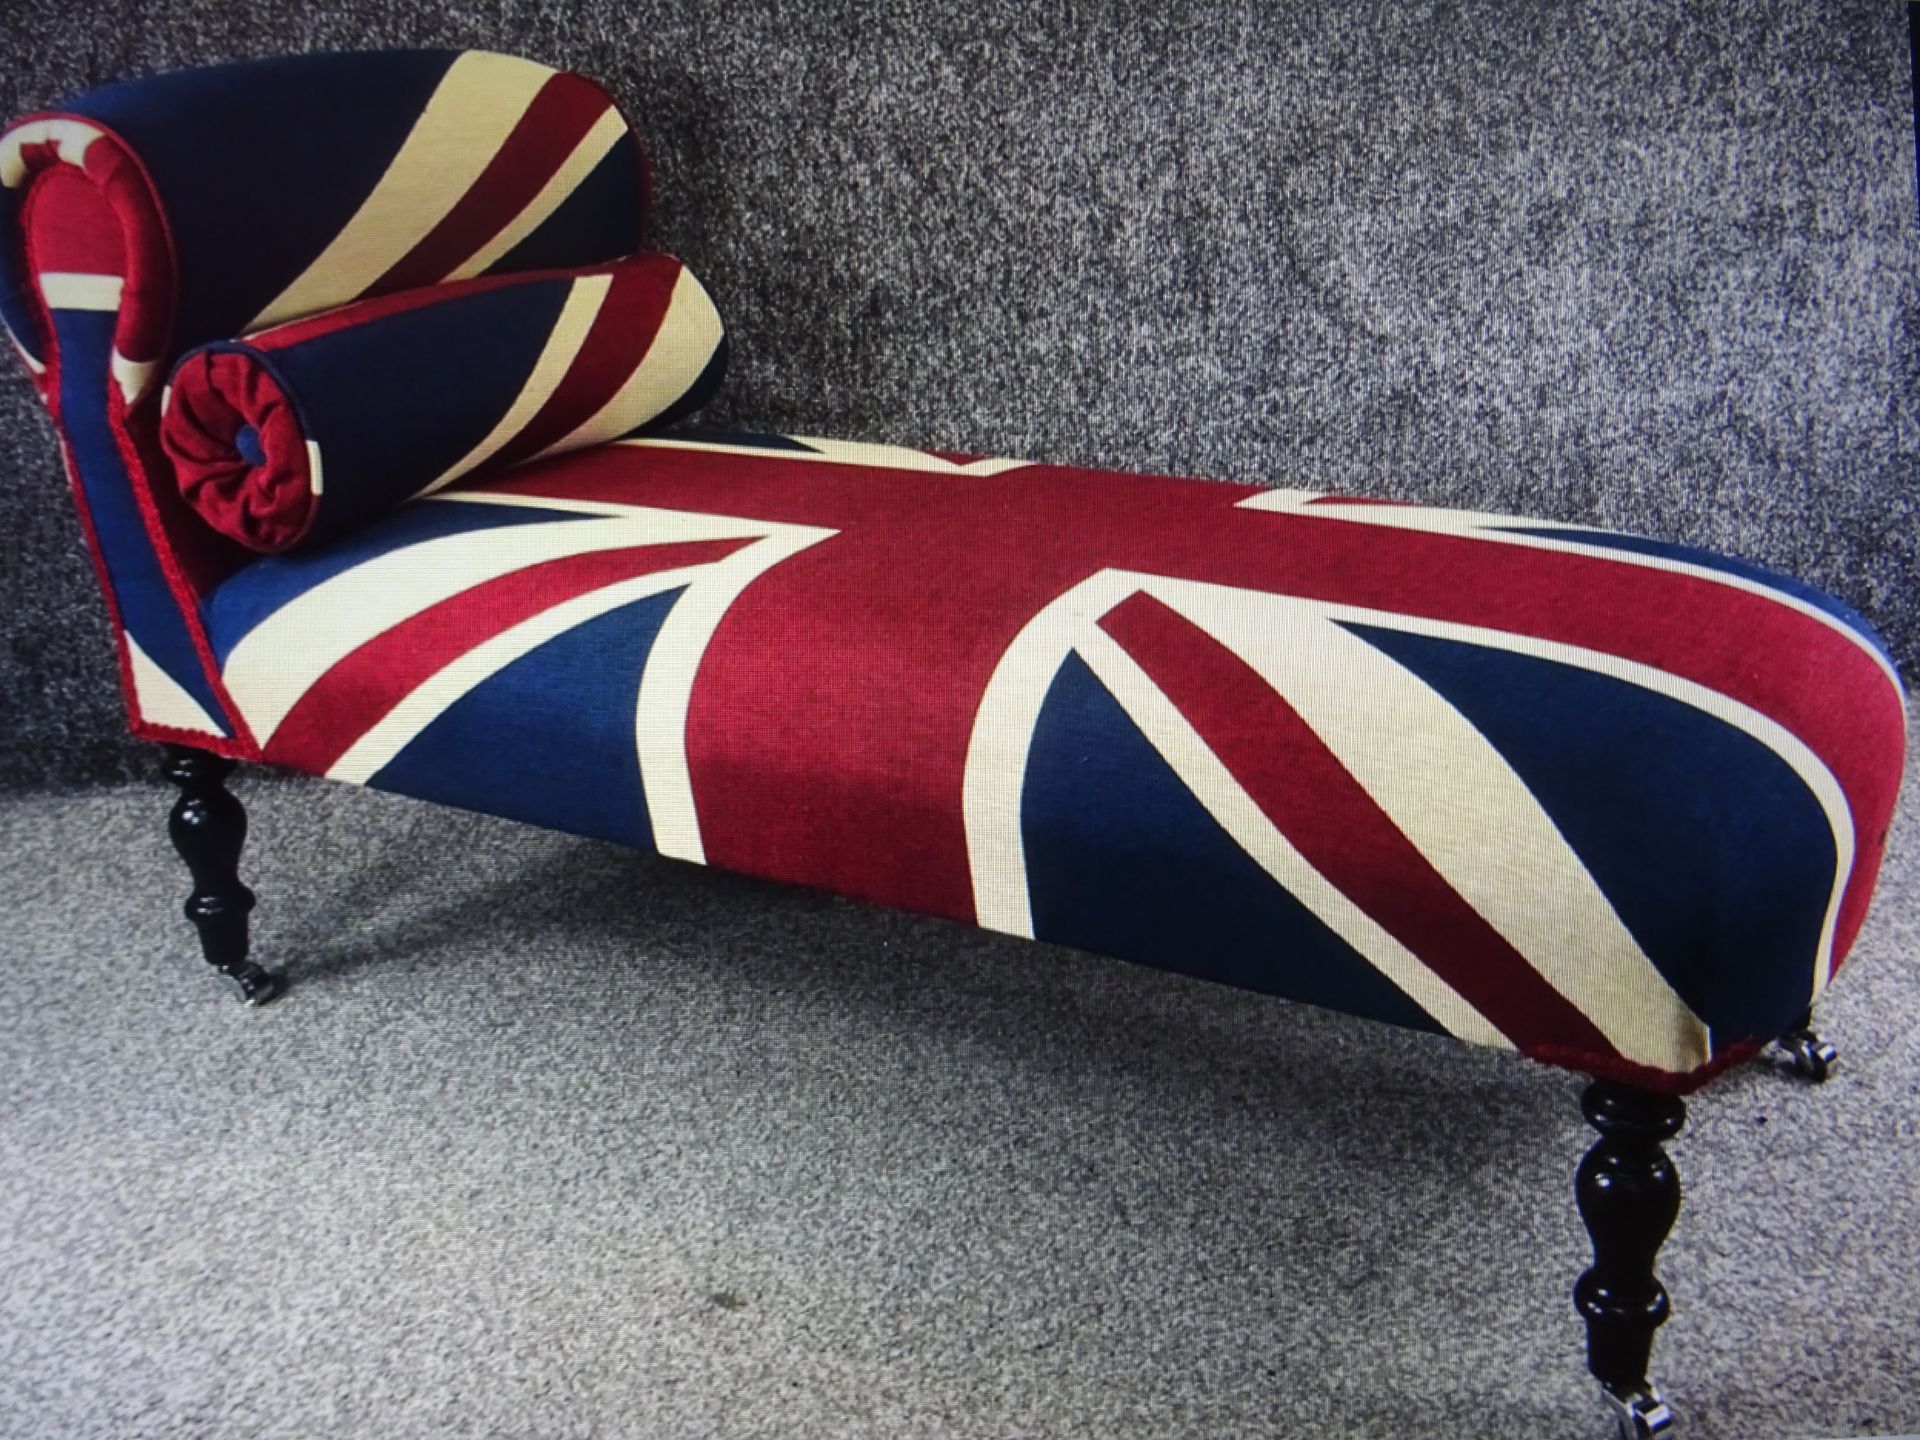 Union Jack/Chaise Longue/Single Ended Day Bench With Pillow